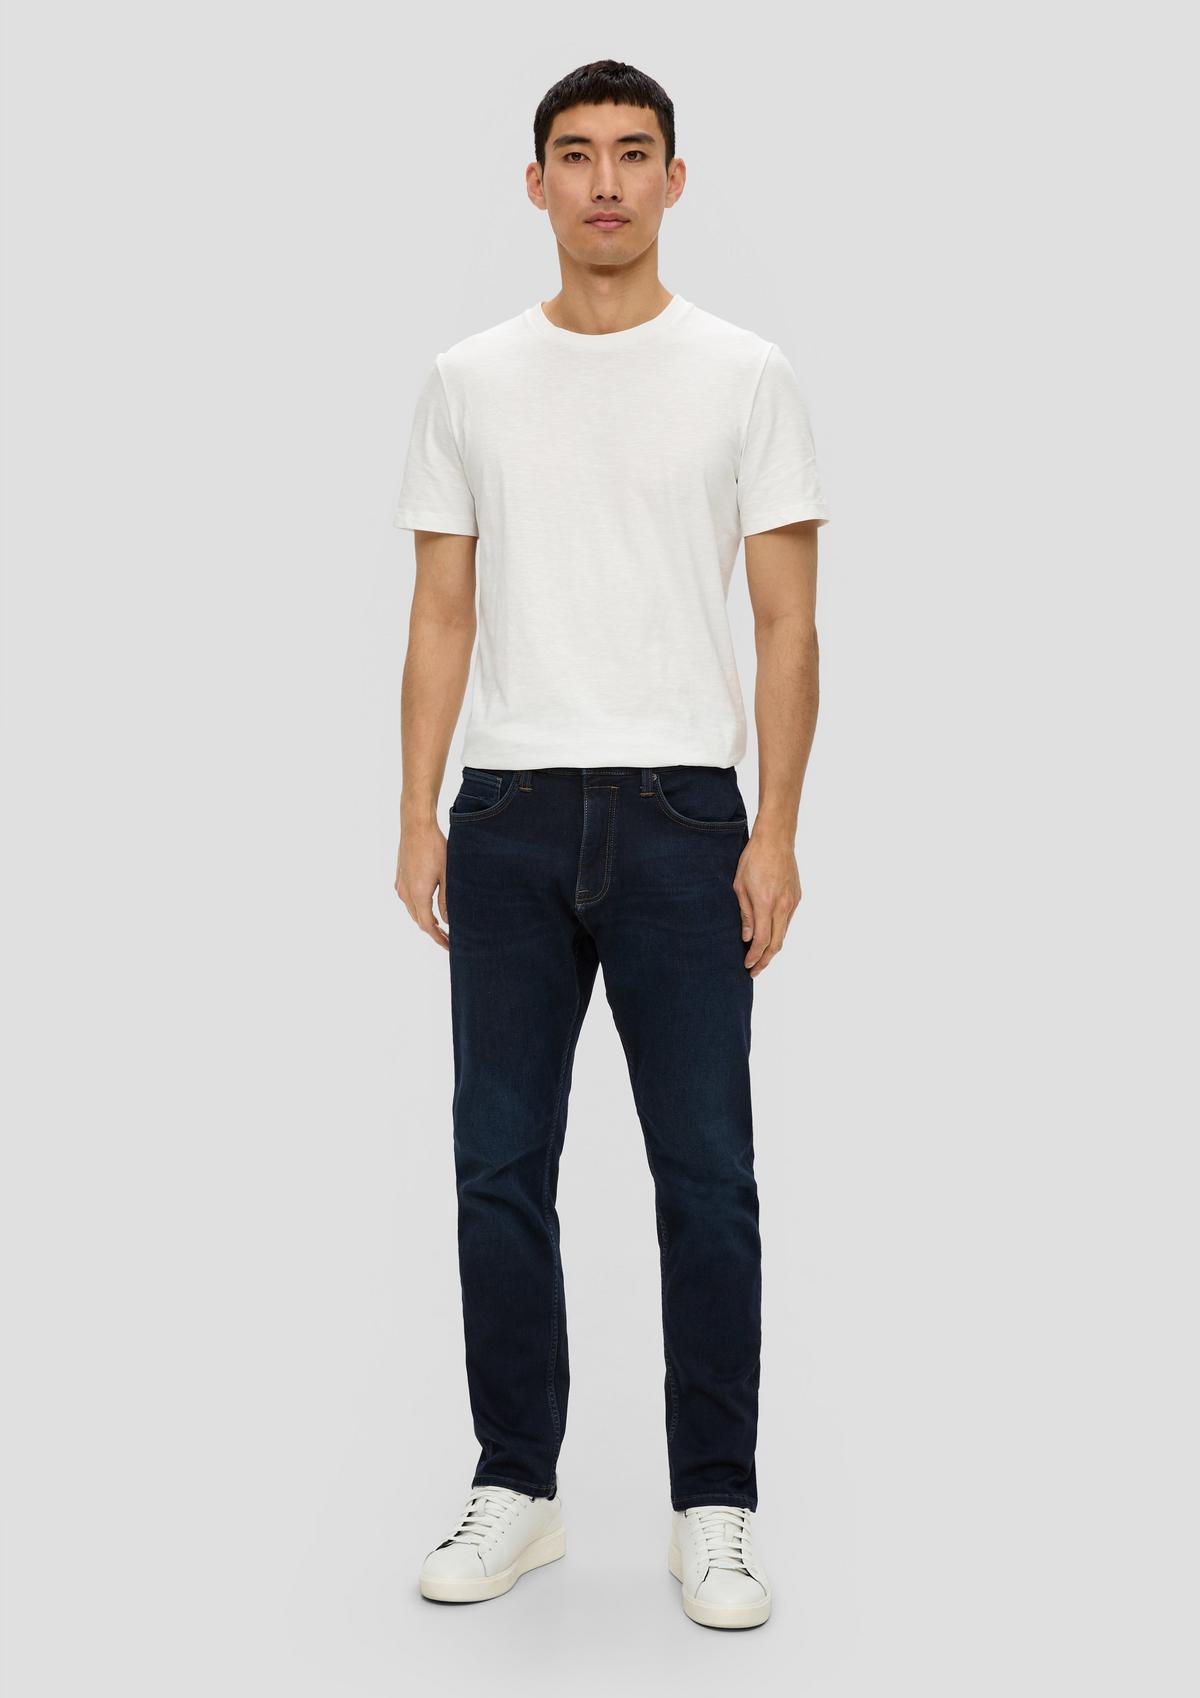 s.Oliver Jeans / Regular Fit / Mid Rise / Tapered Leg